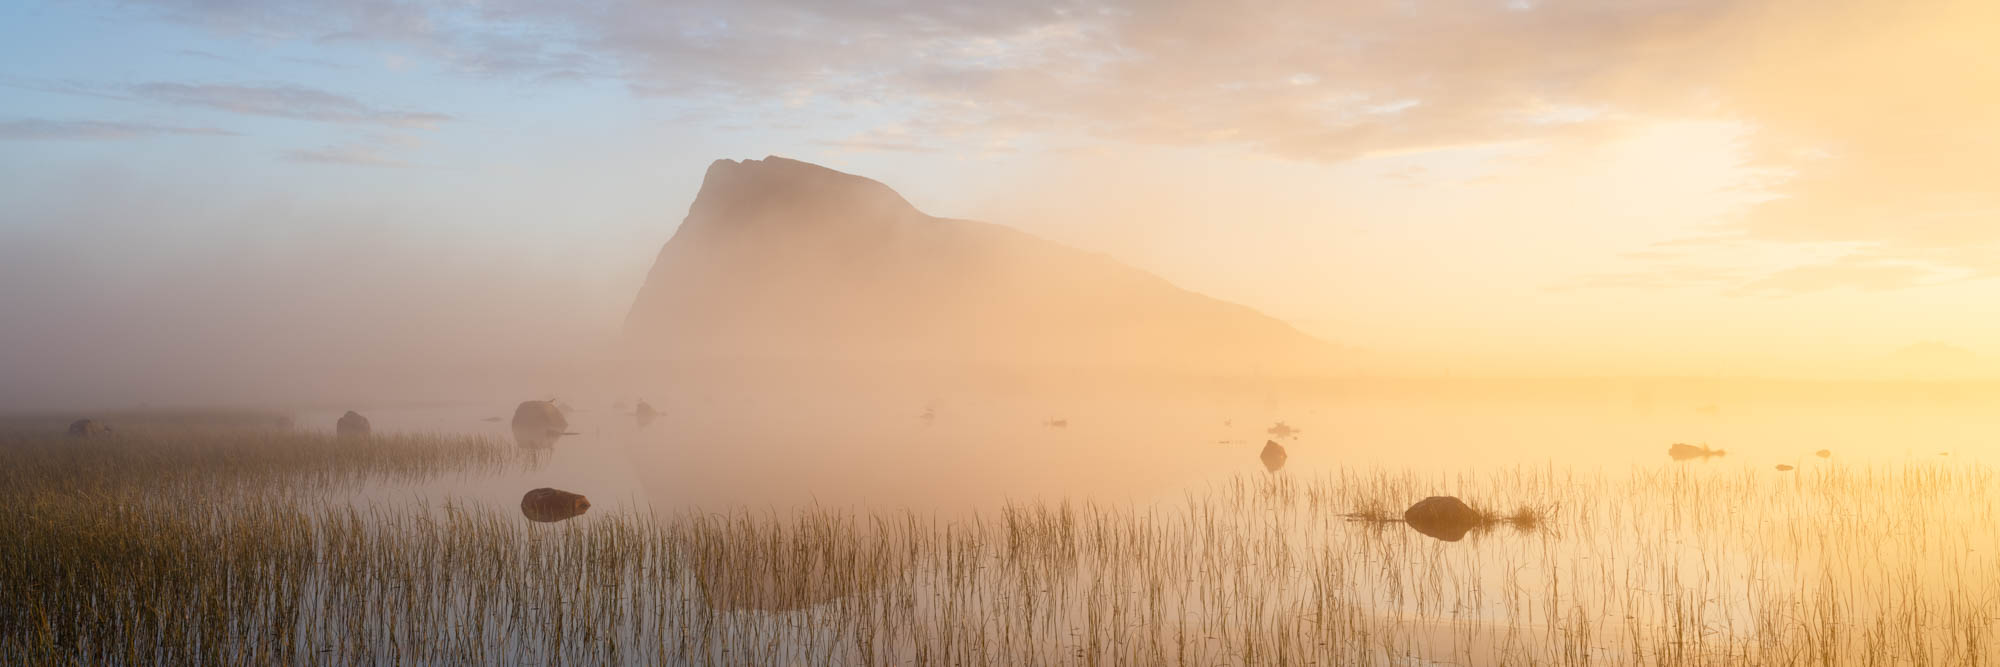 Panorama of a lake and Hoven mountain revealed in the mist in Gimsøymyrene nature reserve on Gimsøy Island in the Lofoten Islands during the midnight sun